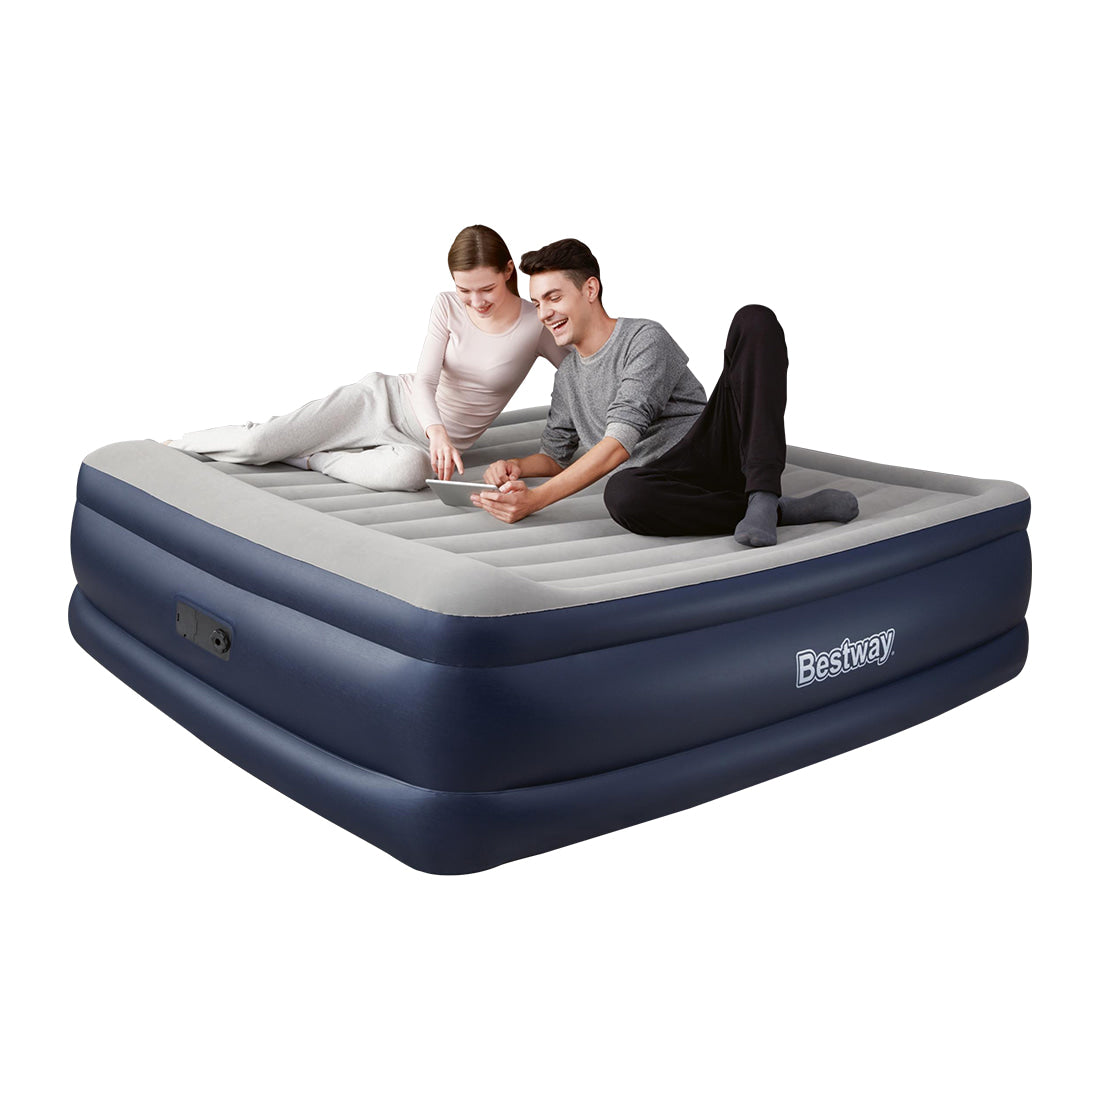 Bestway Tritech KING Inflatable Mattress Airbed 56cm with Built-in AC Pump